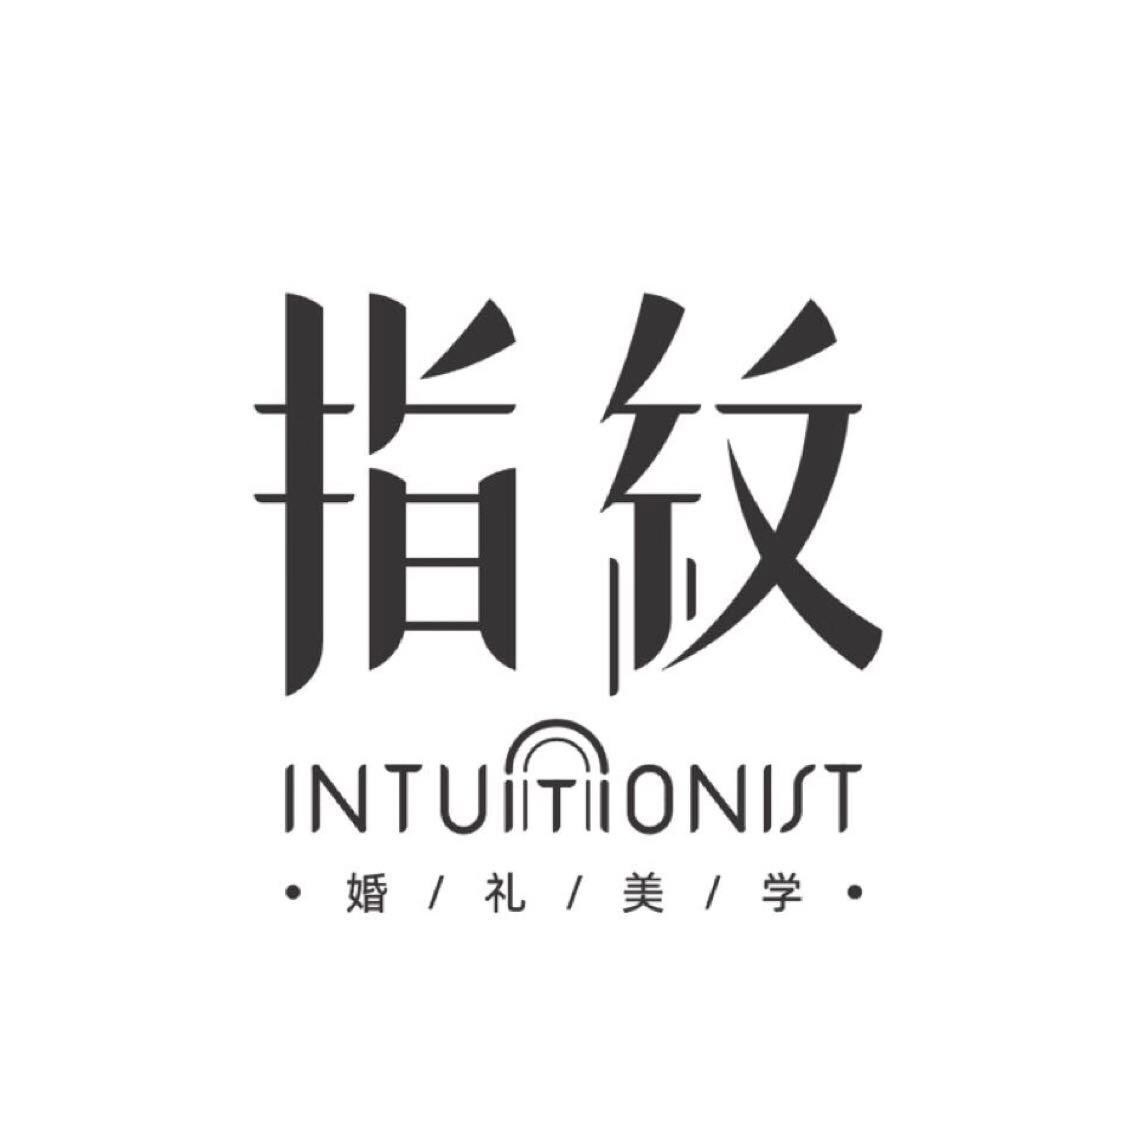 INTUITIONIST指纹婚礼